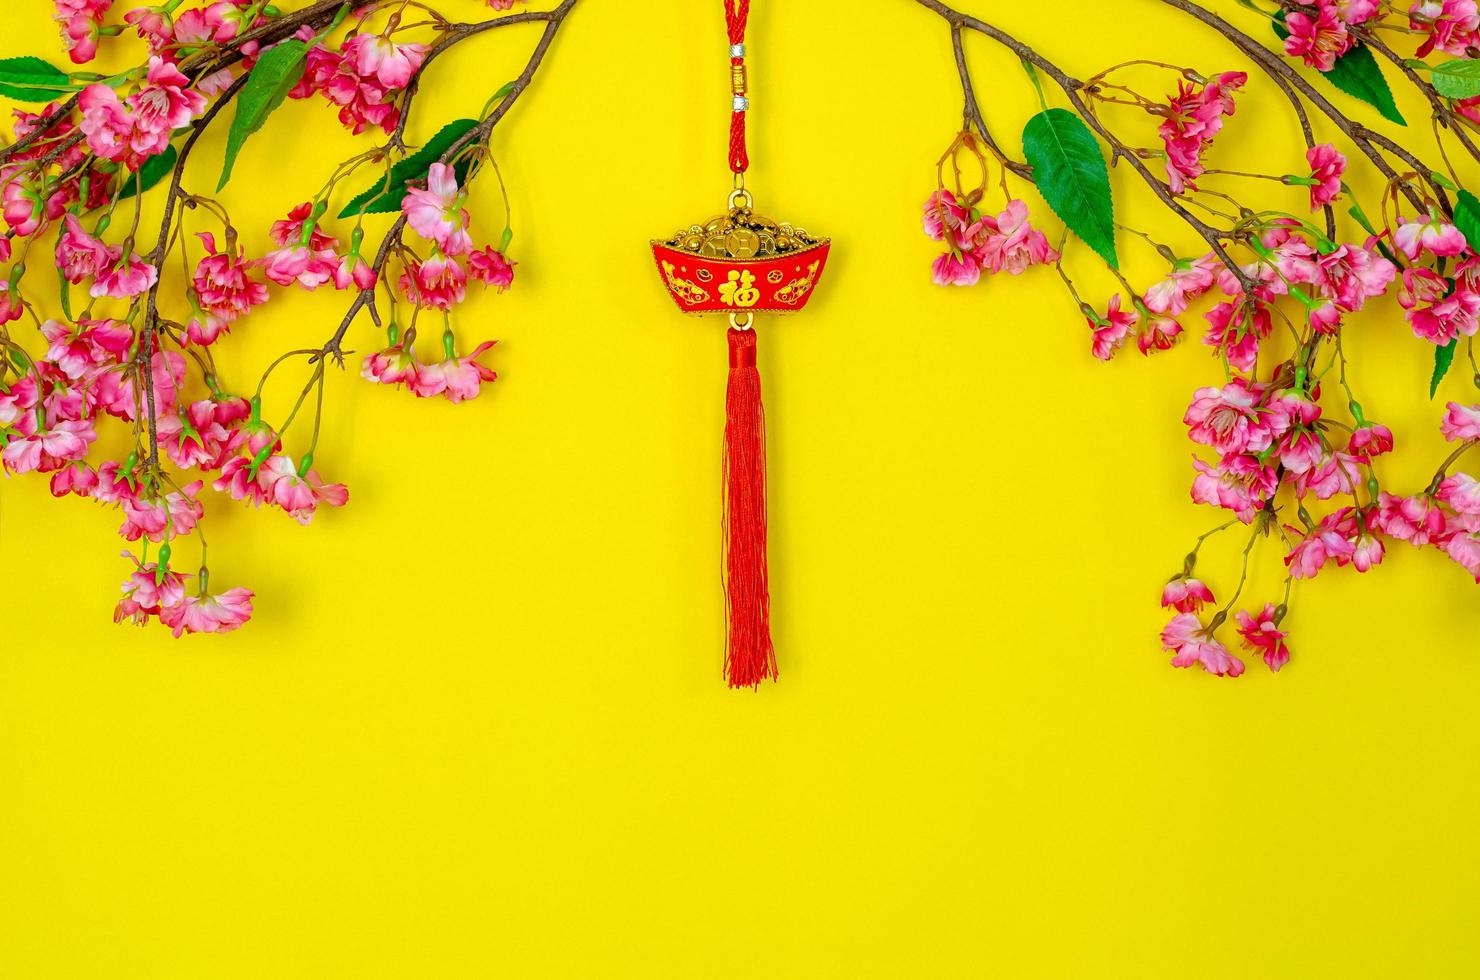 Hanging pendant for Chinese new year ornament meaning of word is wealth with Chinese blossom flowers on yellow background. photo